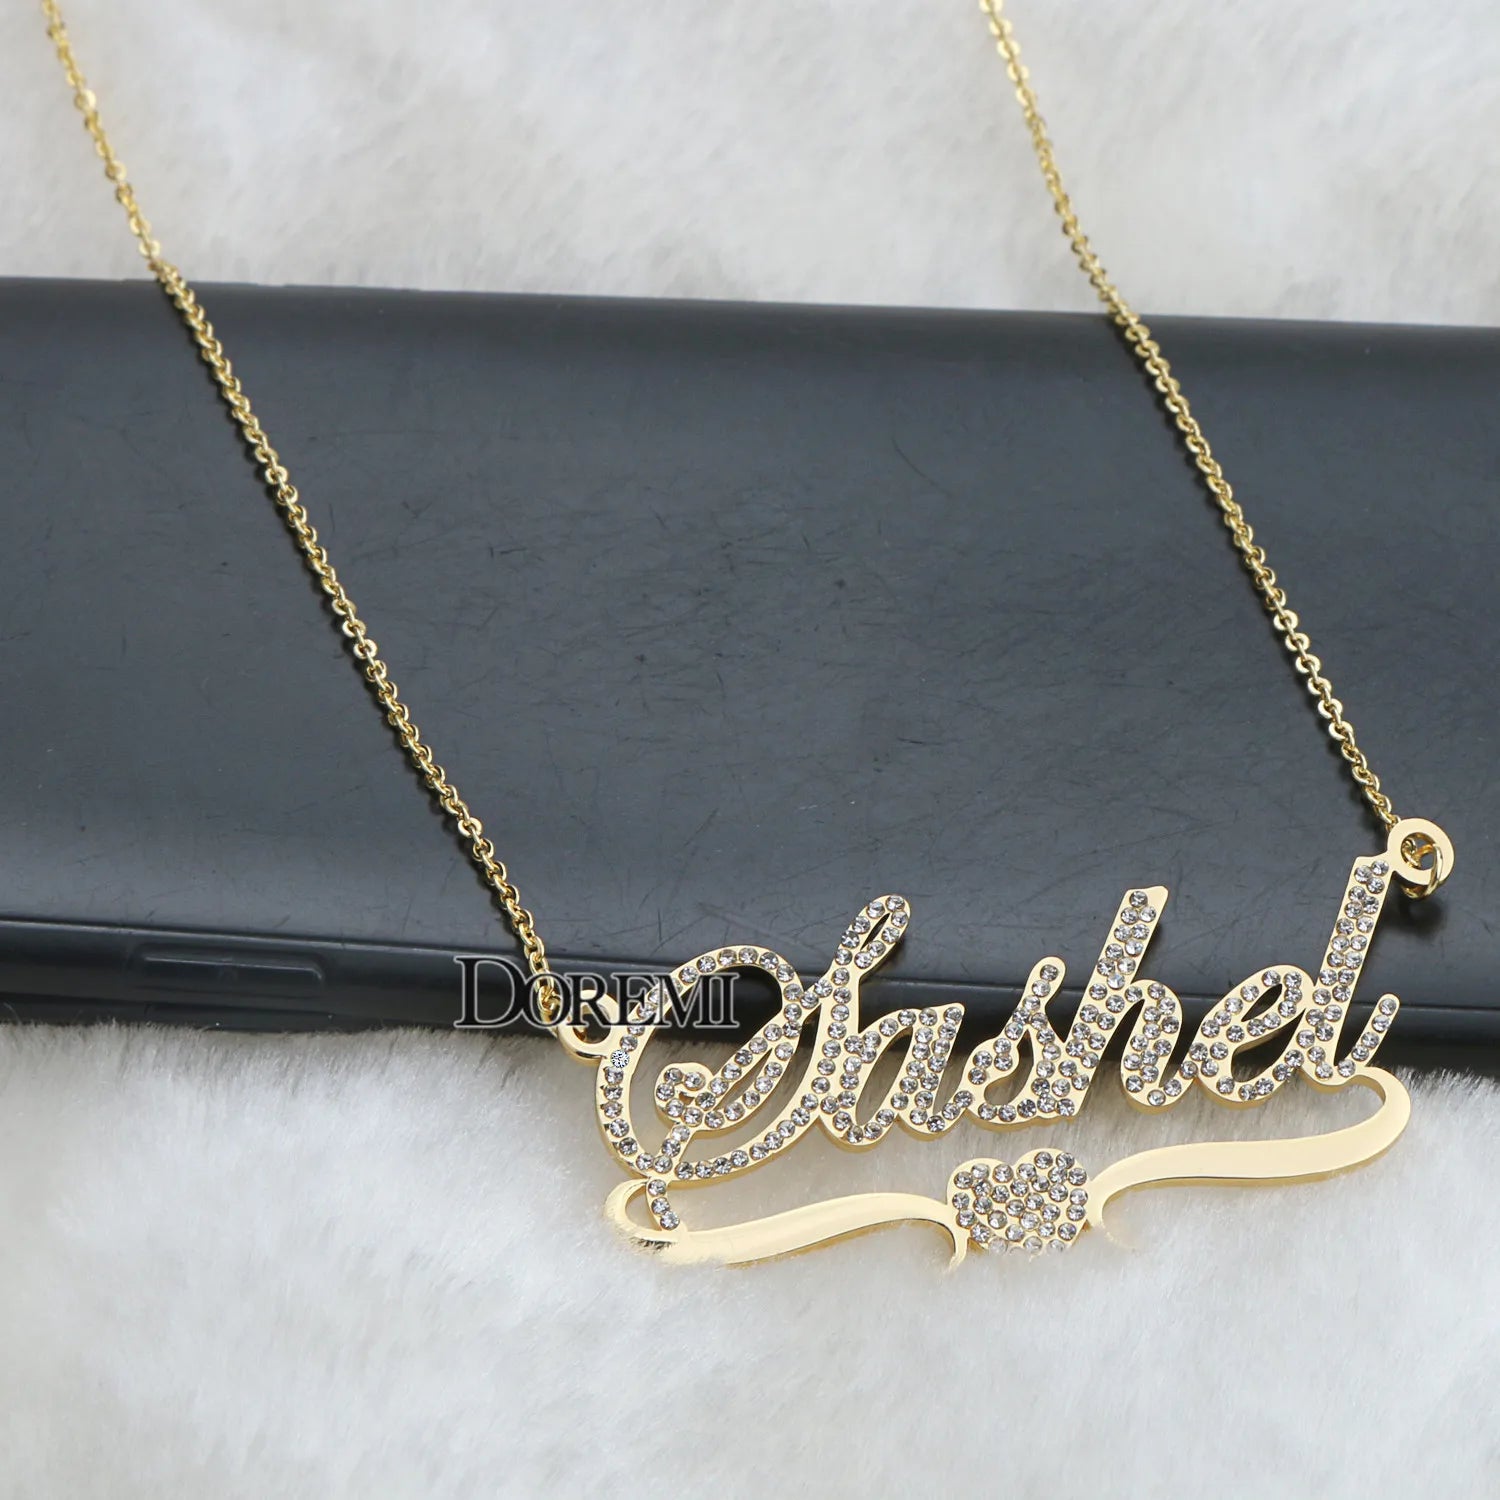 DOREMI 316L Stainless Custom Name Pendant Necklace